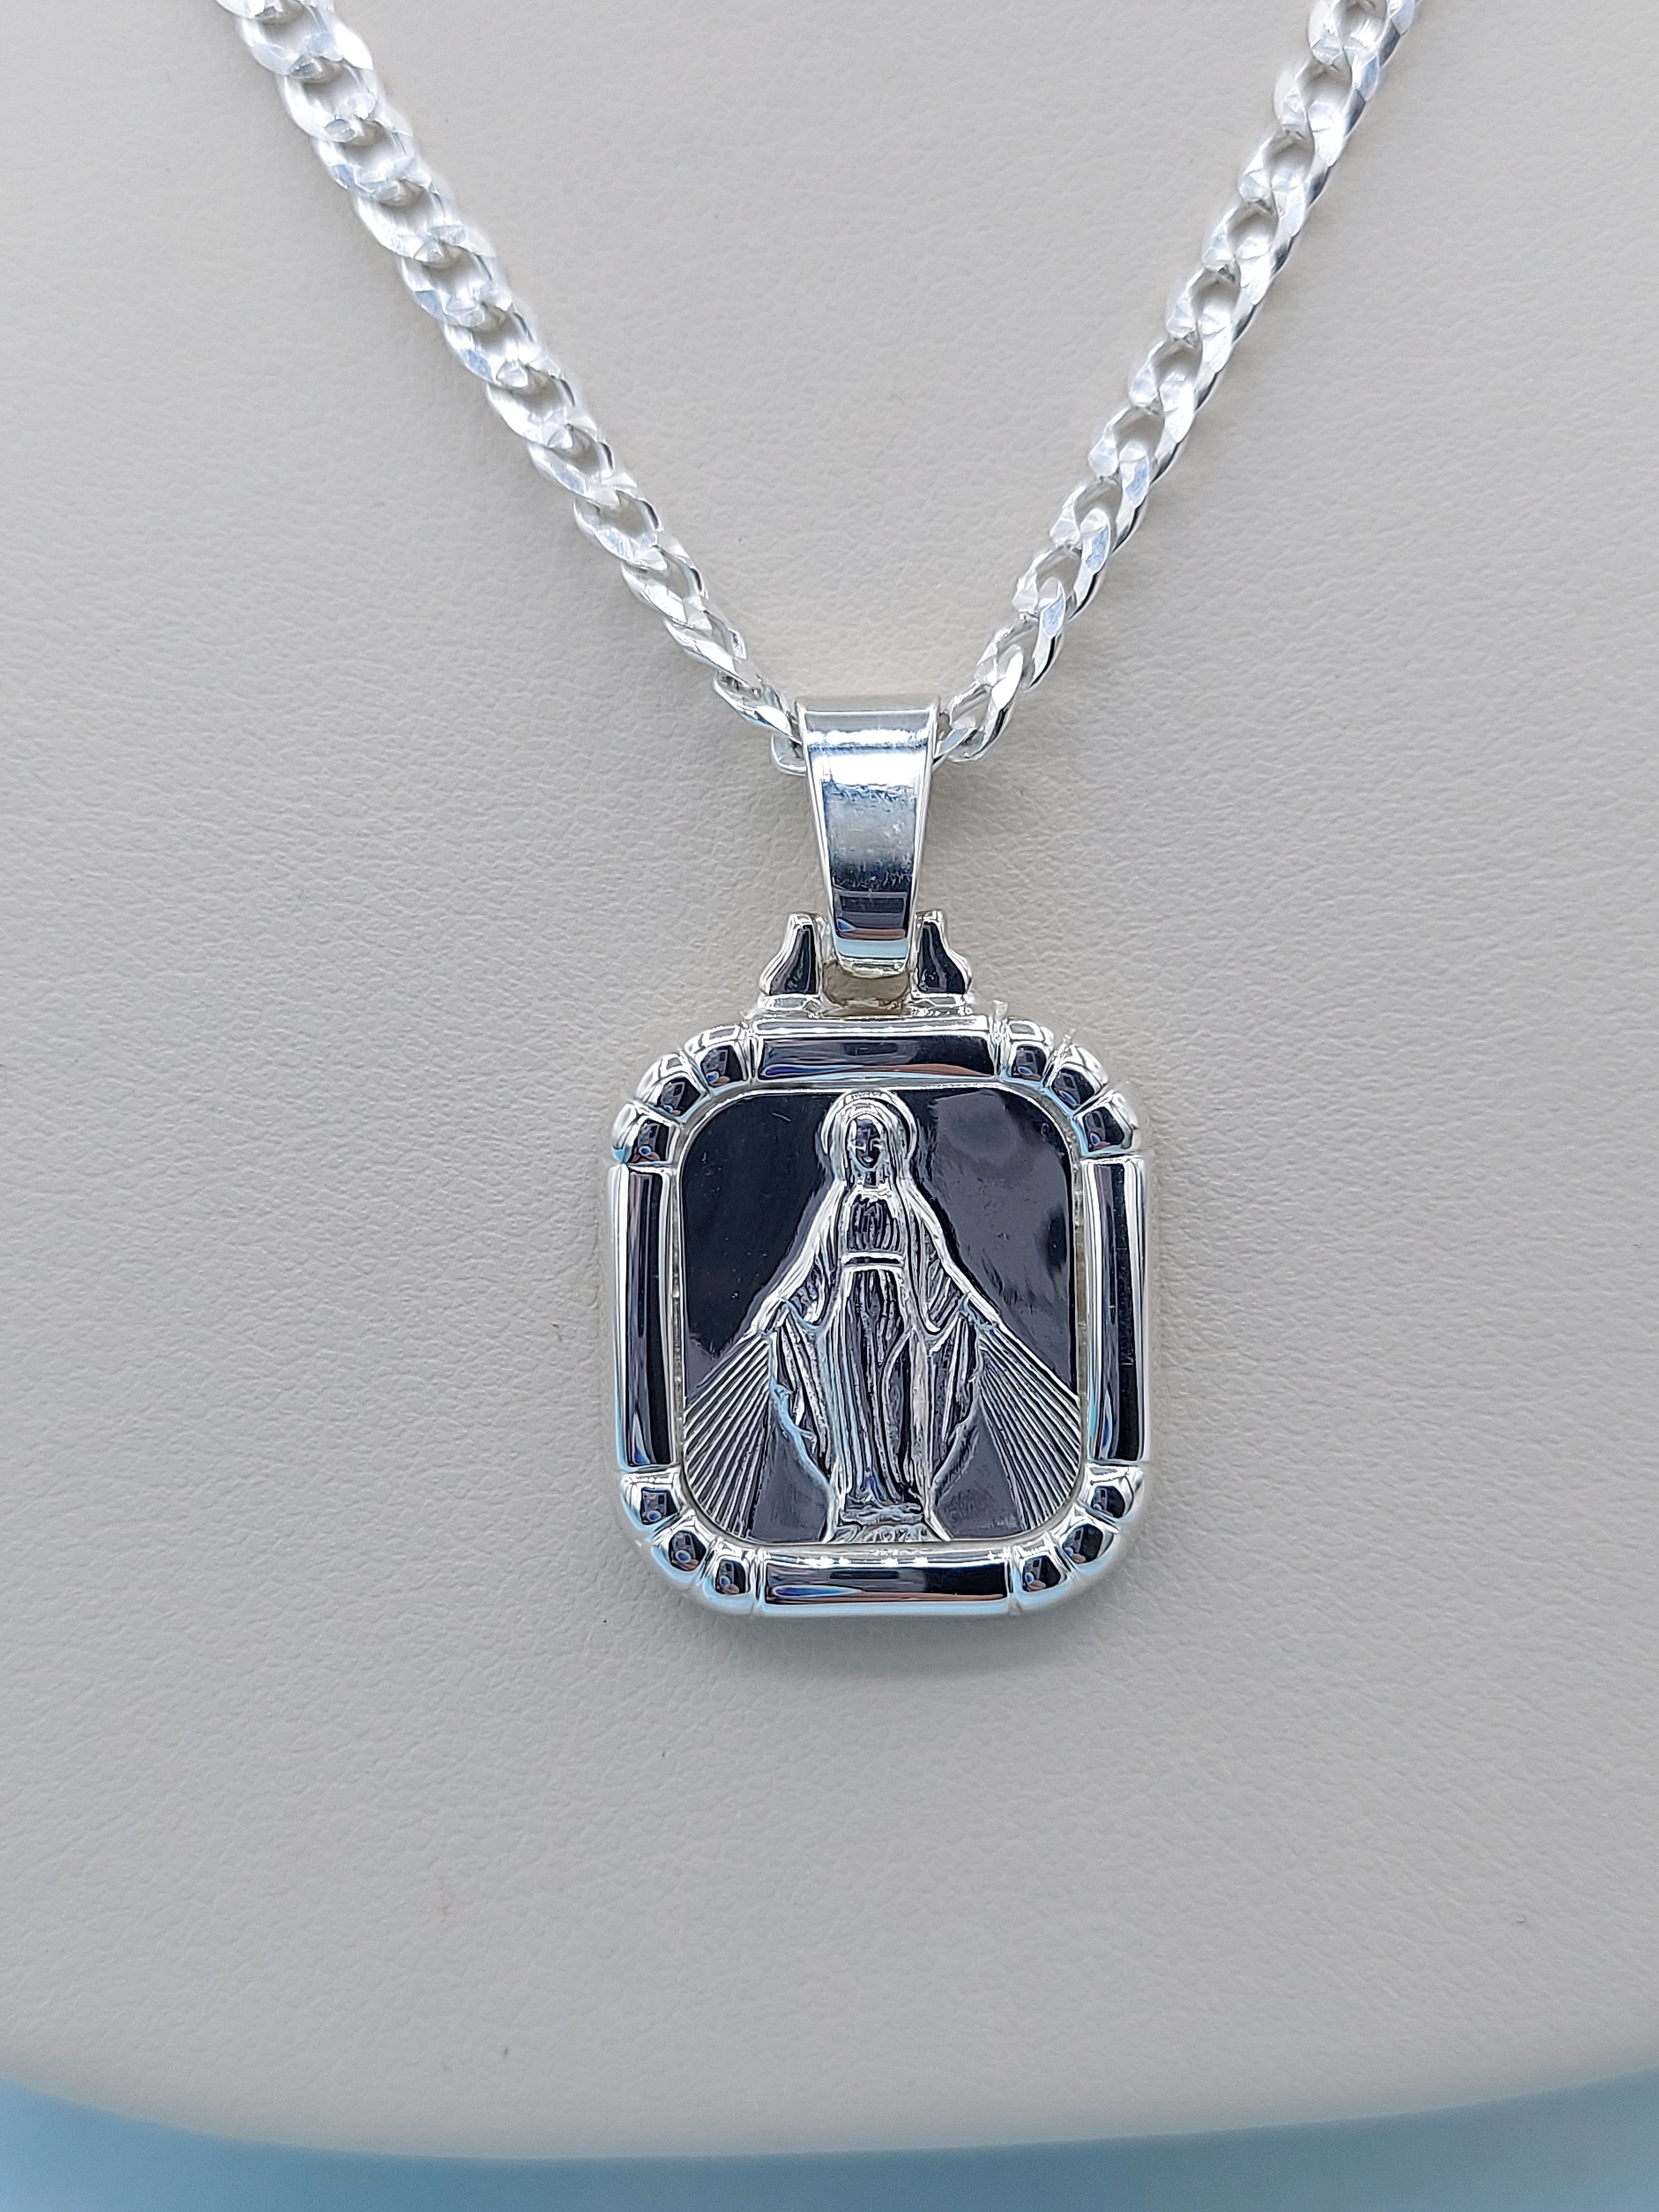 CVRAVO Virgin Mary Necklace 925 Sterling Silver Religious Faith Pendant  Virgen de Guadalupe Necklace Religious Jewelry Gifts for Women Girls,  Sterling Silver, No Gemstone : Amazon.ca: Clothing, Shoes & Accessories